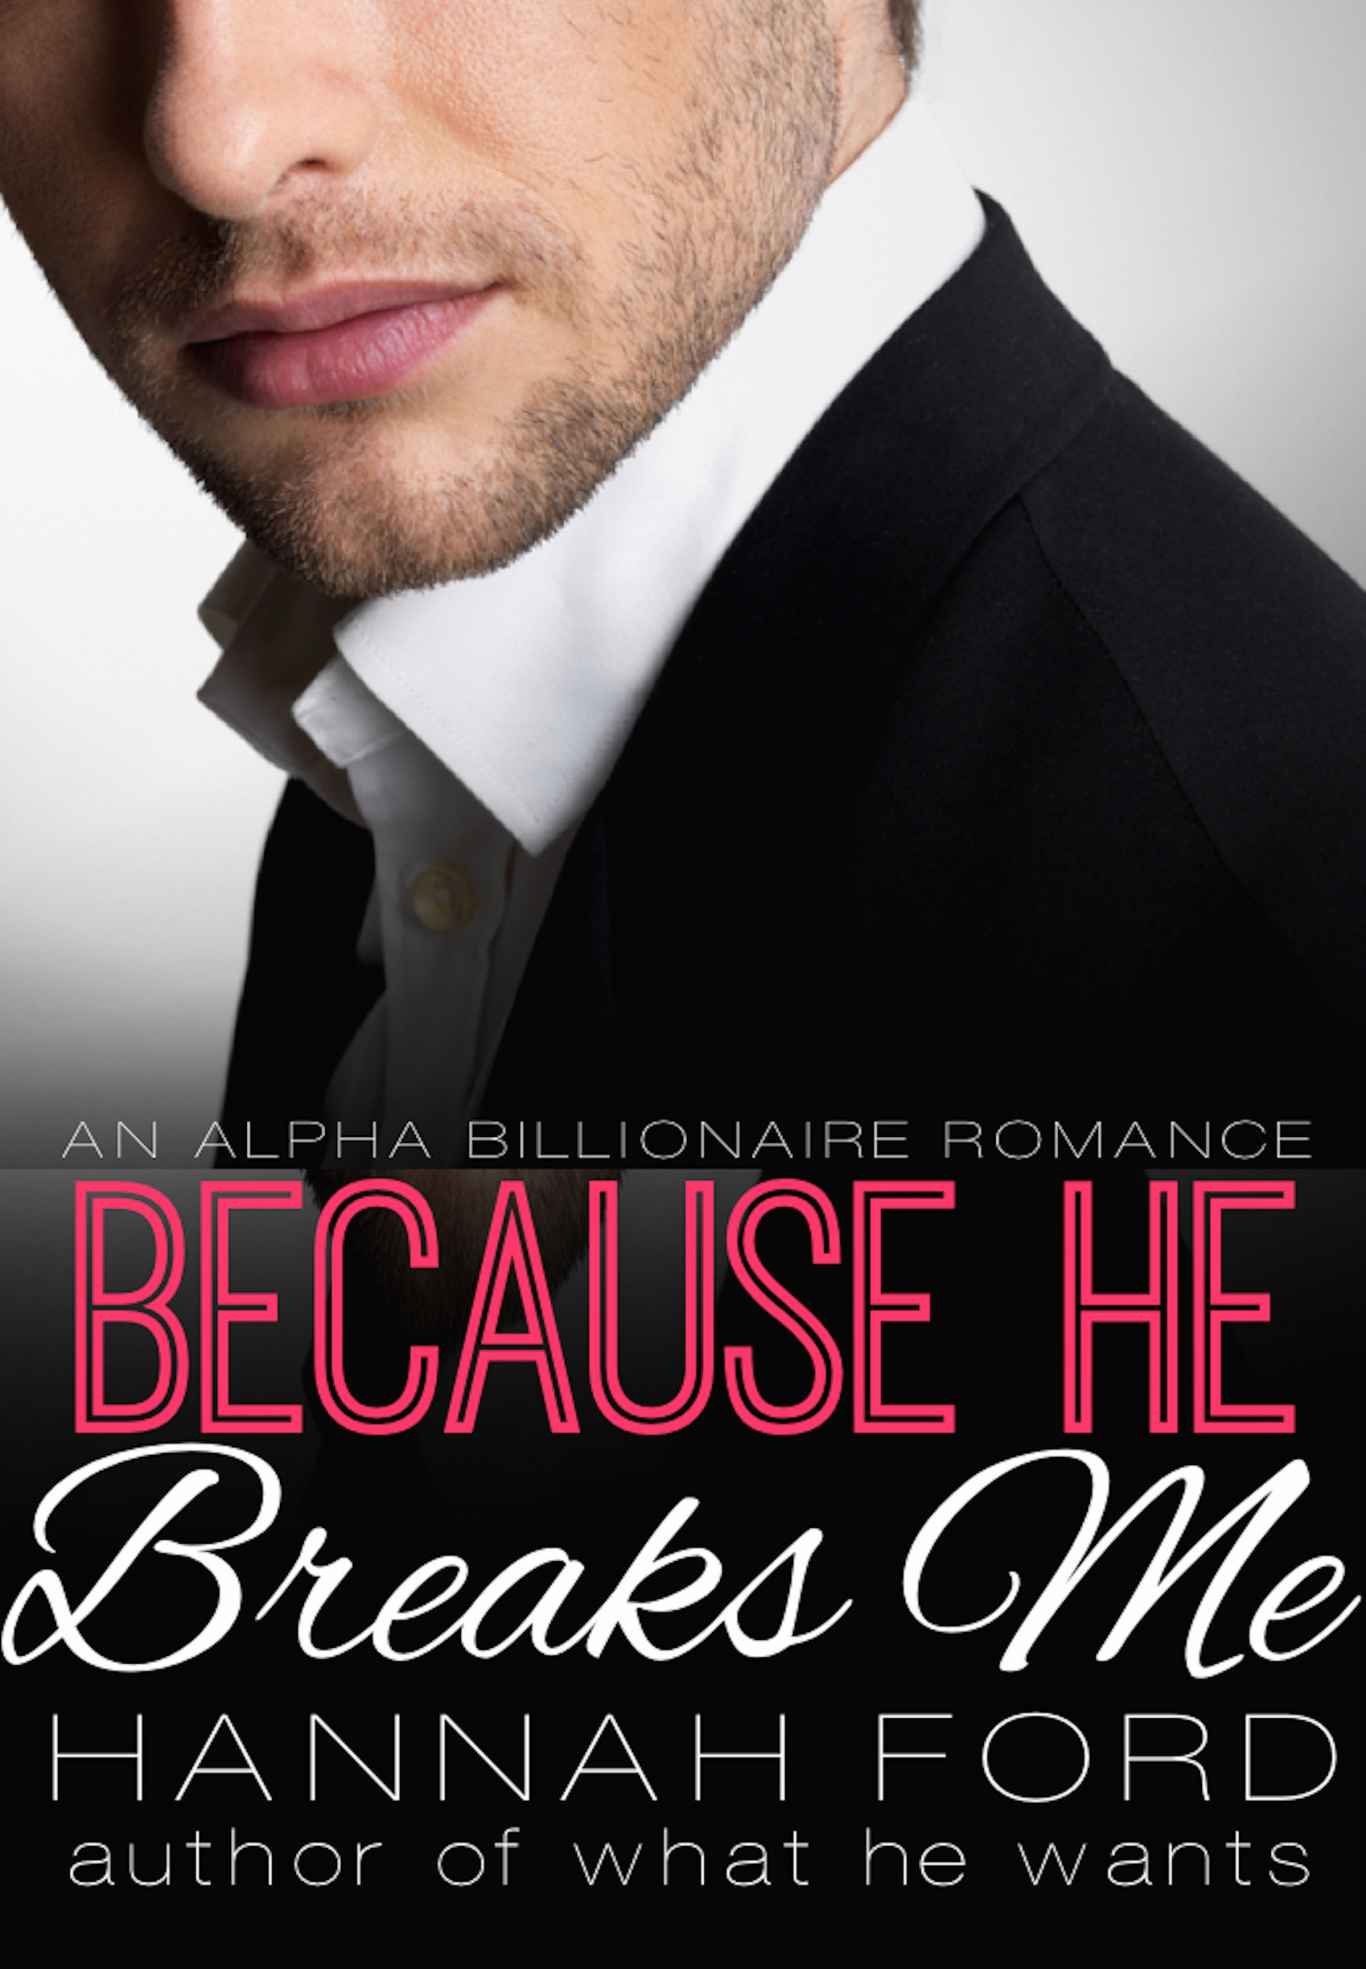 Because He Breaks Me by Hannah Ford